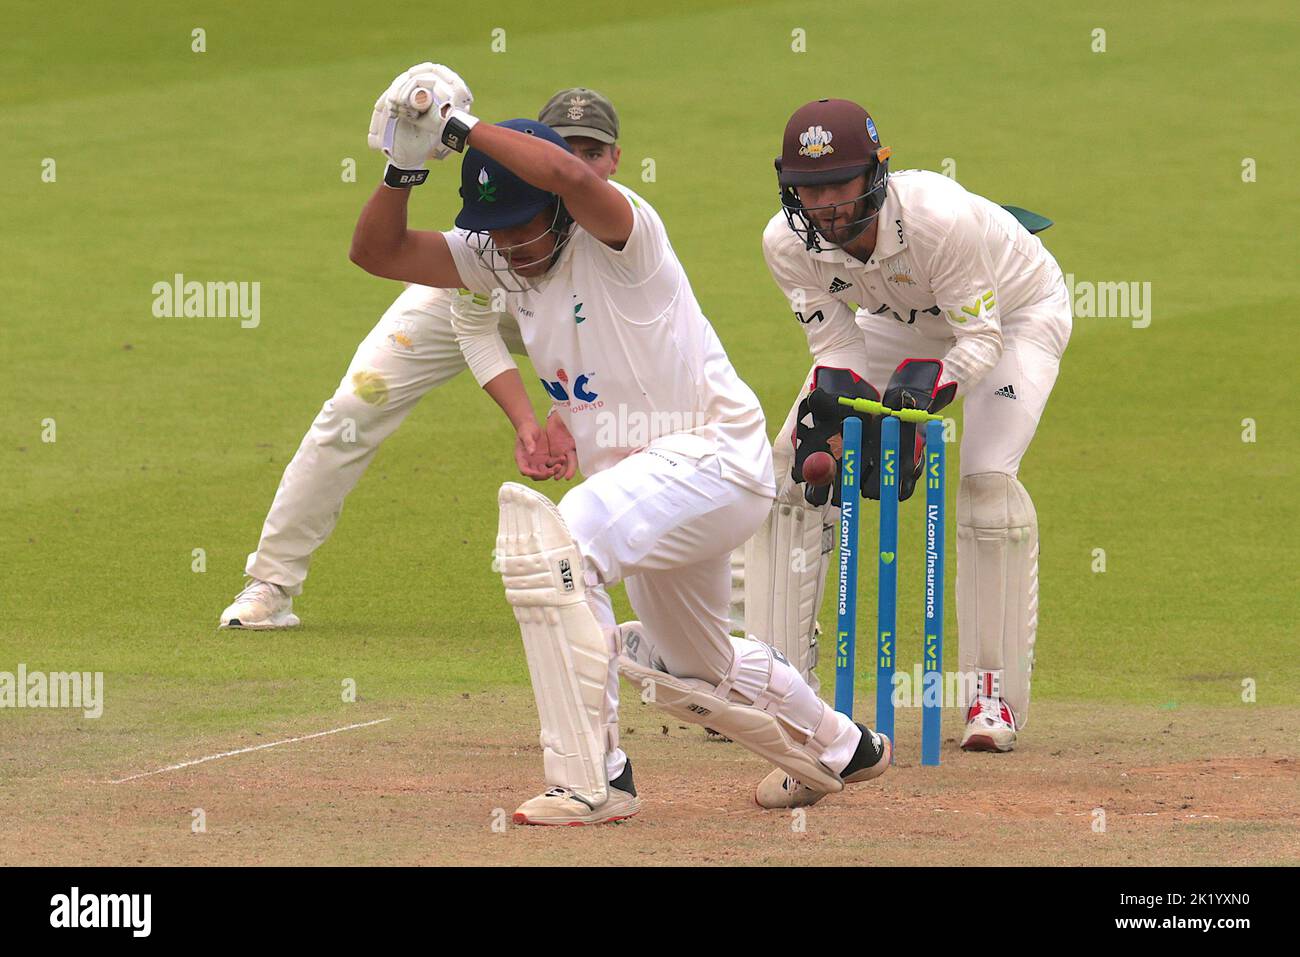 21 September, 2022. London, UK. Yorkshire’s Ben Mike is bowled by Cameron Steel as Surrey take on Yorkshire in the County Championship at the Kia Oval, day two. David Rowe/Alamy Live News Stock Photo